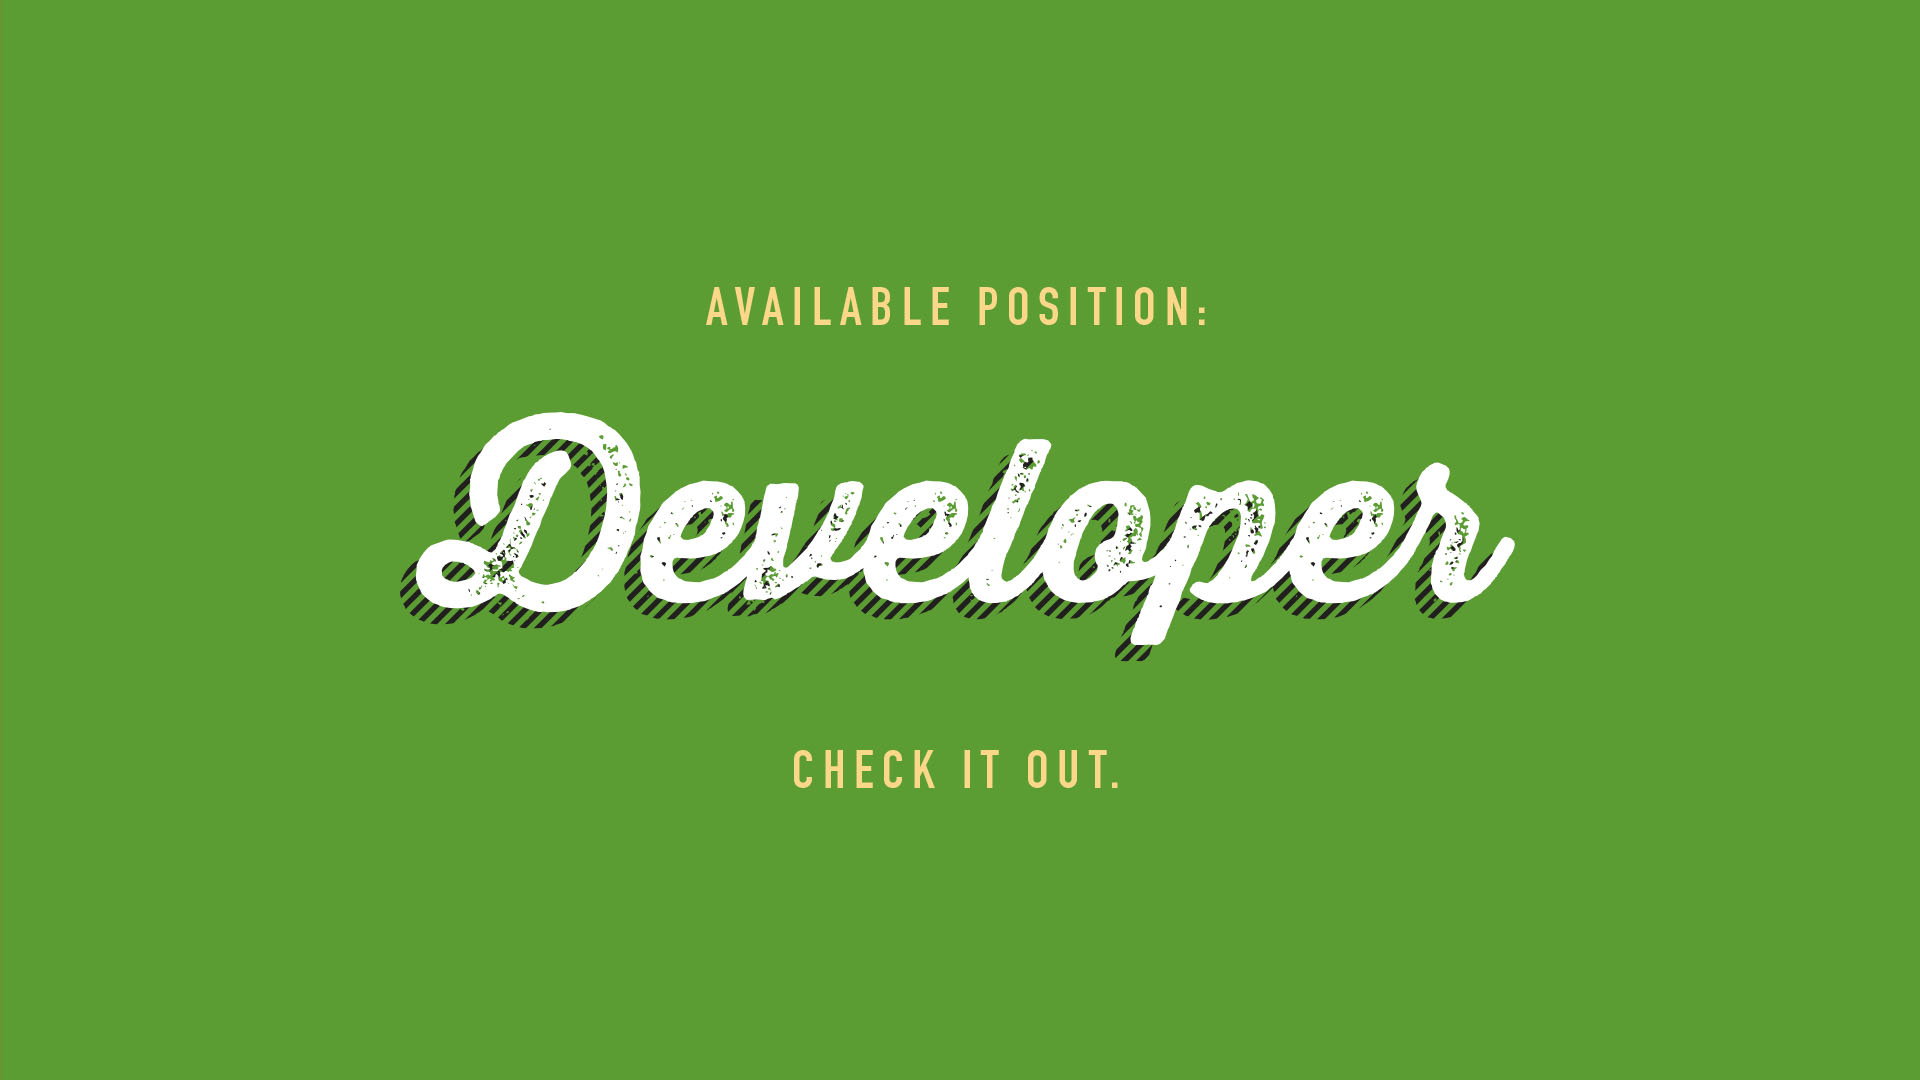 Available Position: Developer. Check it out.